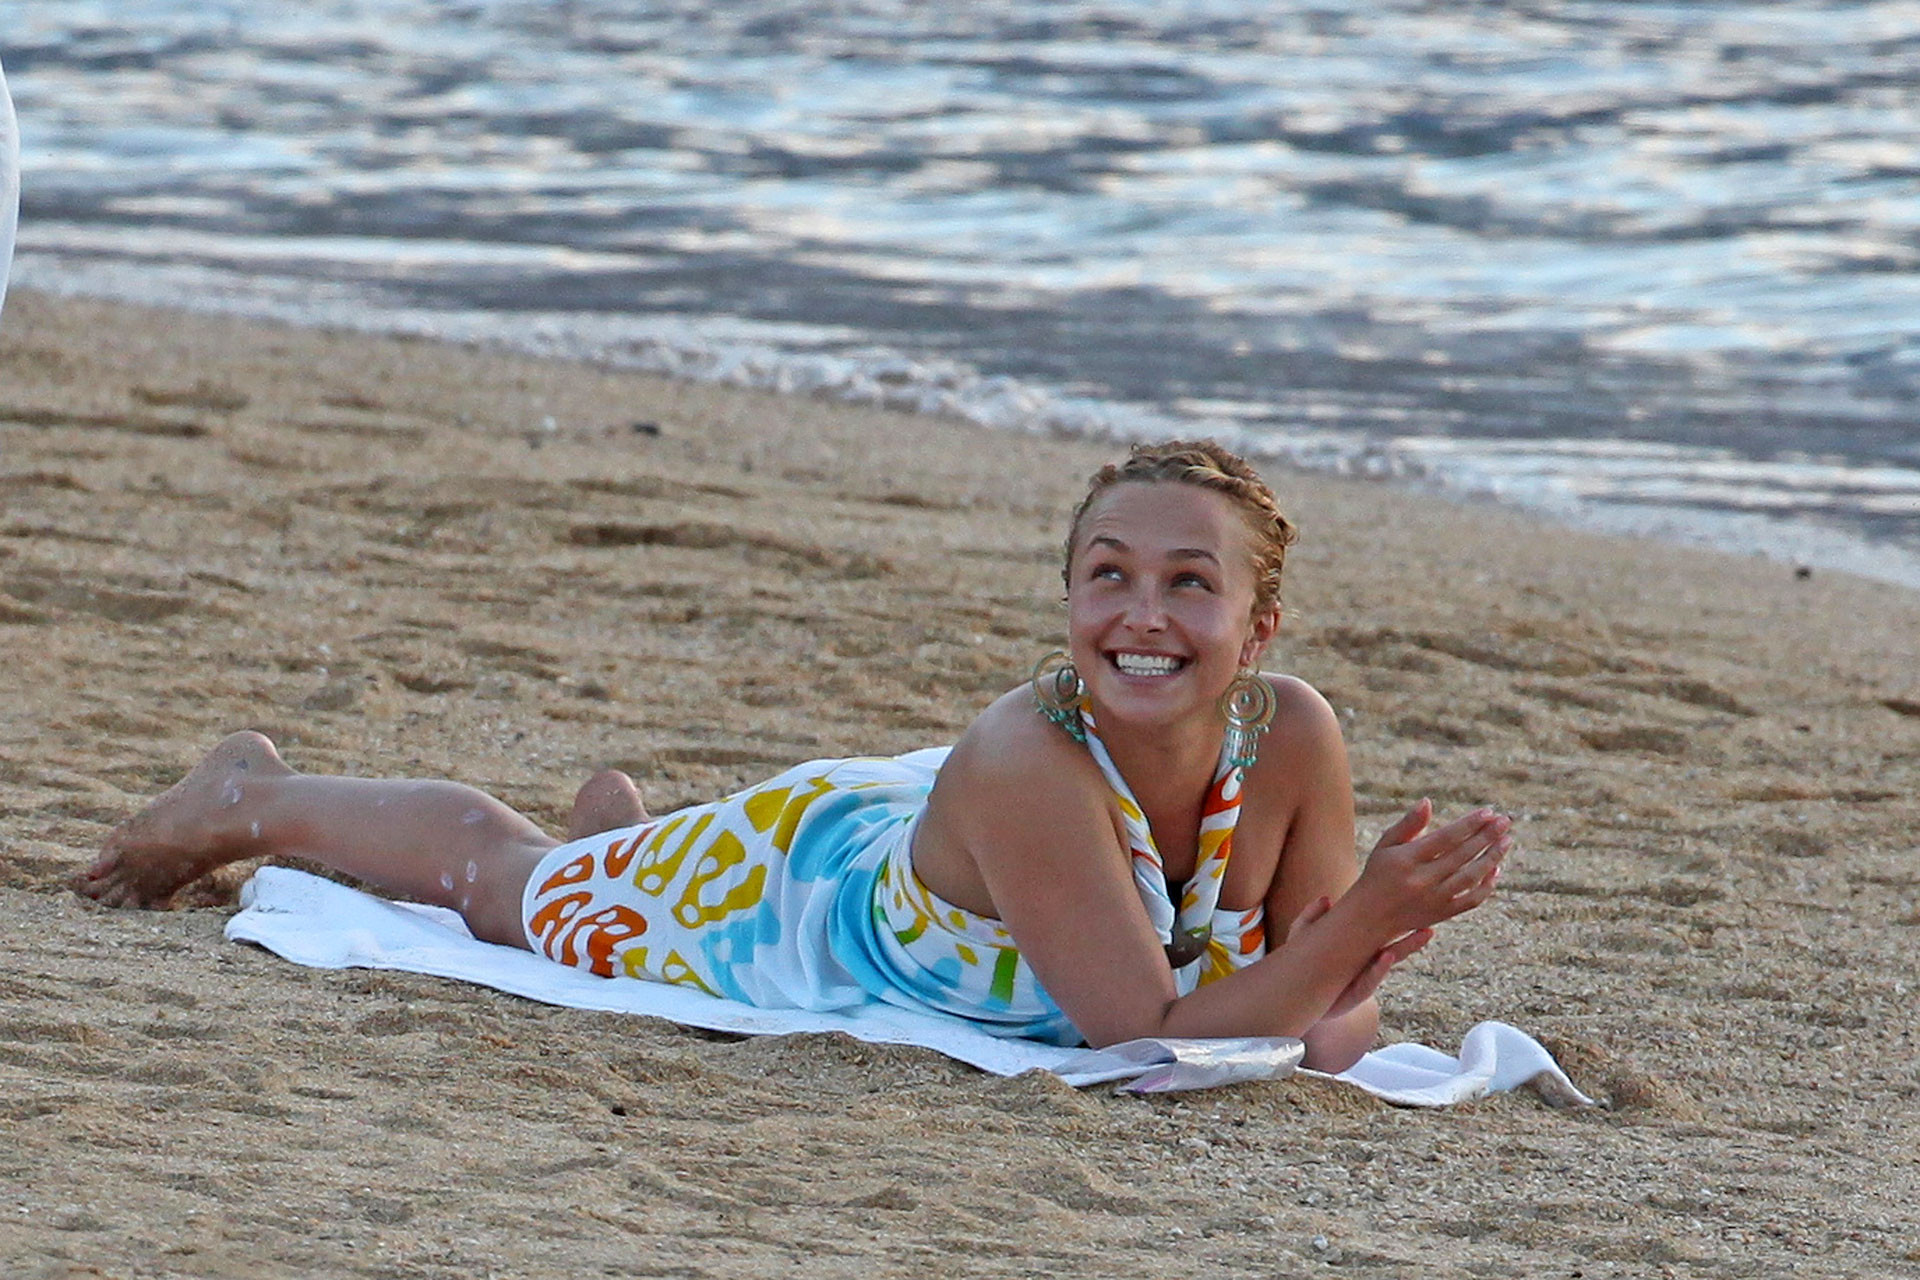 Hayden Panettiere lying on the beach and showing sexy ass in bikini #75321018